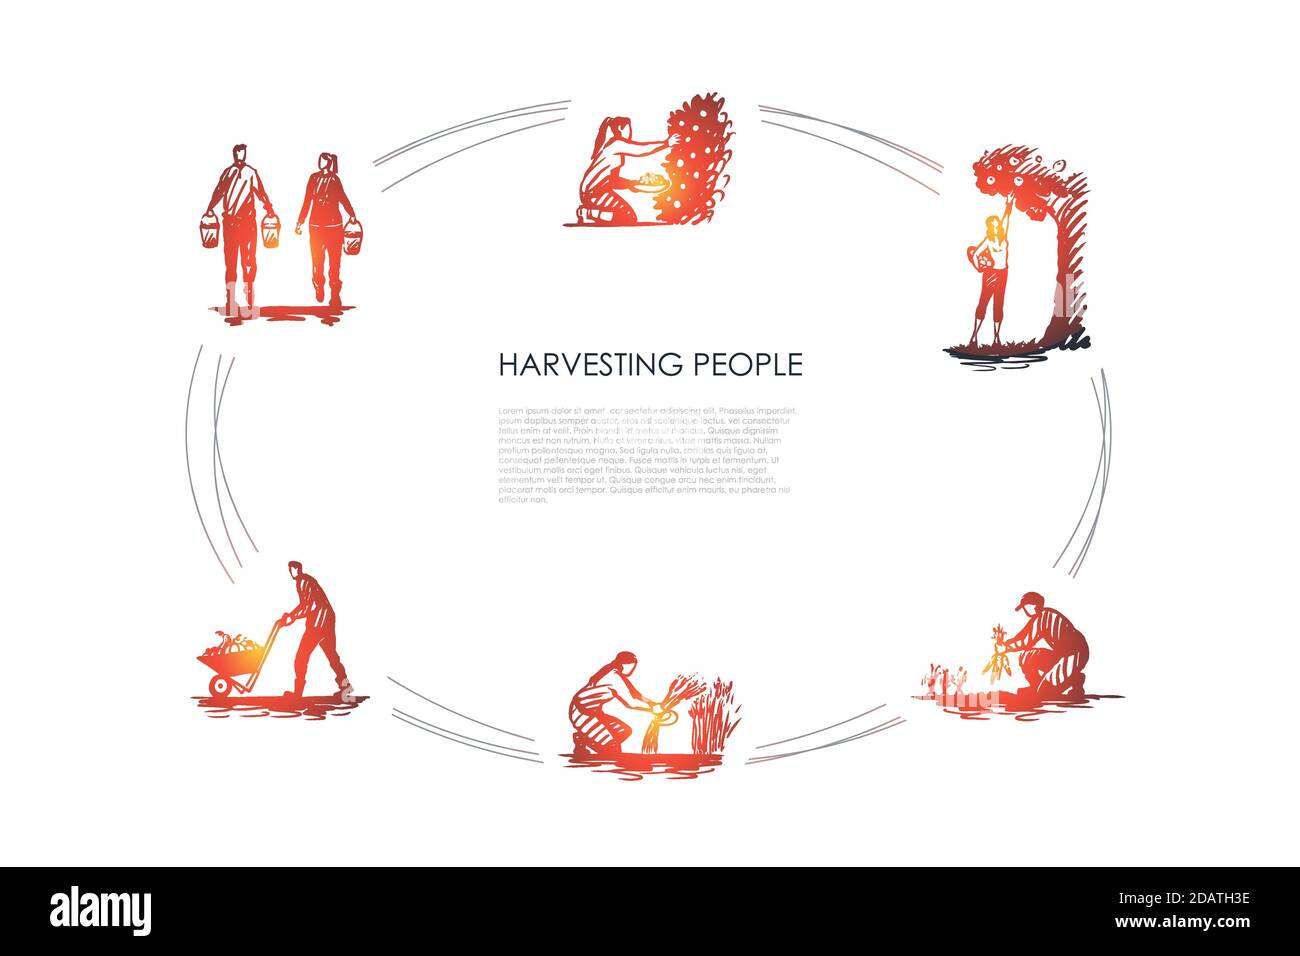 Harvesting people - people picking fruits and carrots, binding grass, carrying and transporting harvest vector concept set Stock Vector